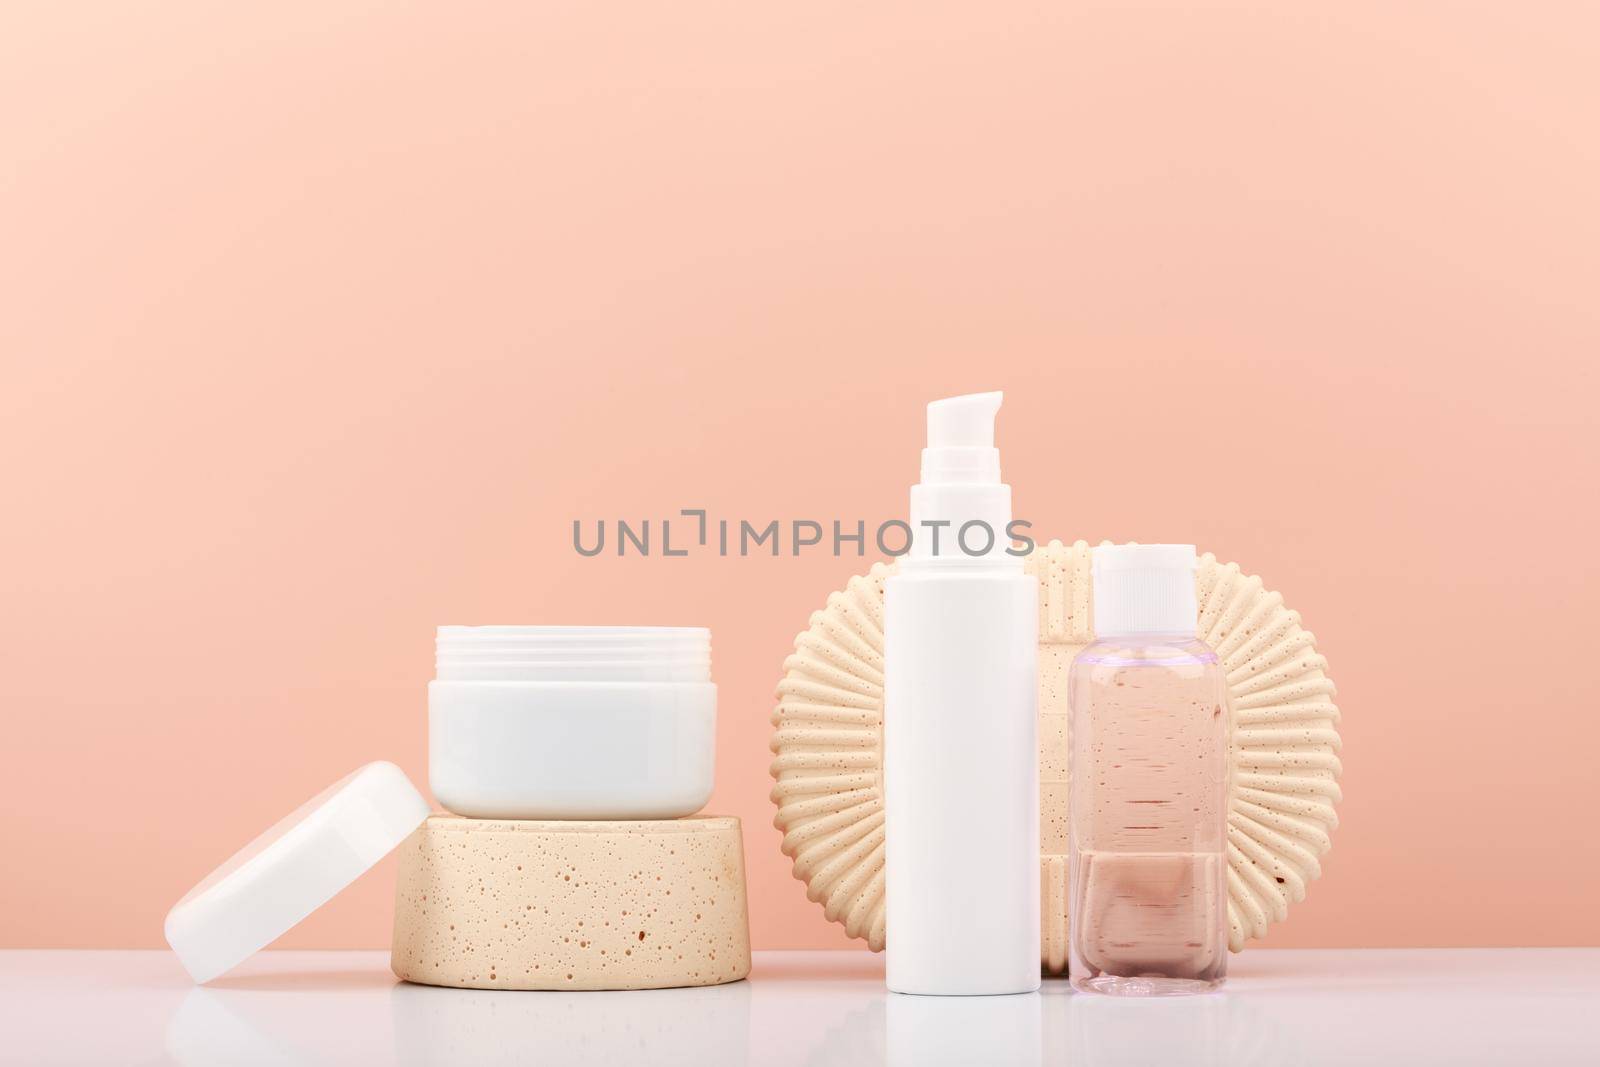 Set of skin care products on gypsum shapes on white table against bright beige background with copy space. Products for daily skin care routine and luxury skin treatment